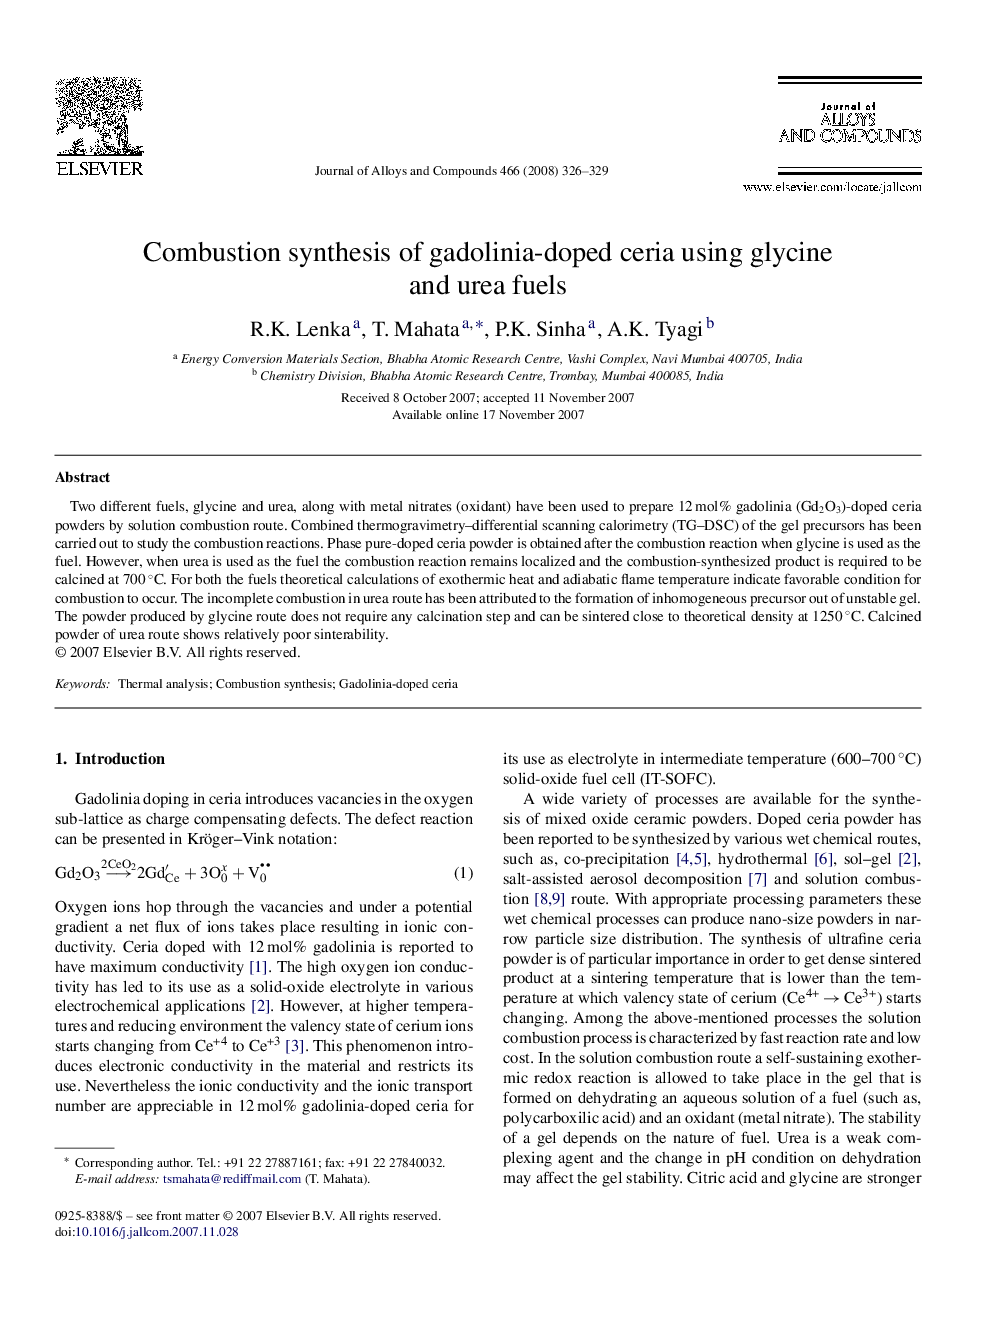 Combustion synthesis of gadolinia-doped ceria using glycine and urea fuels